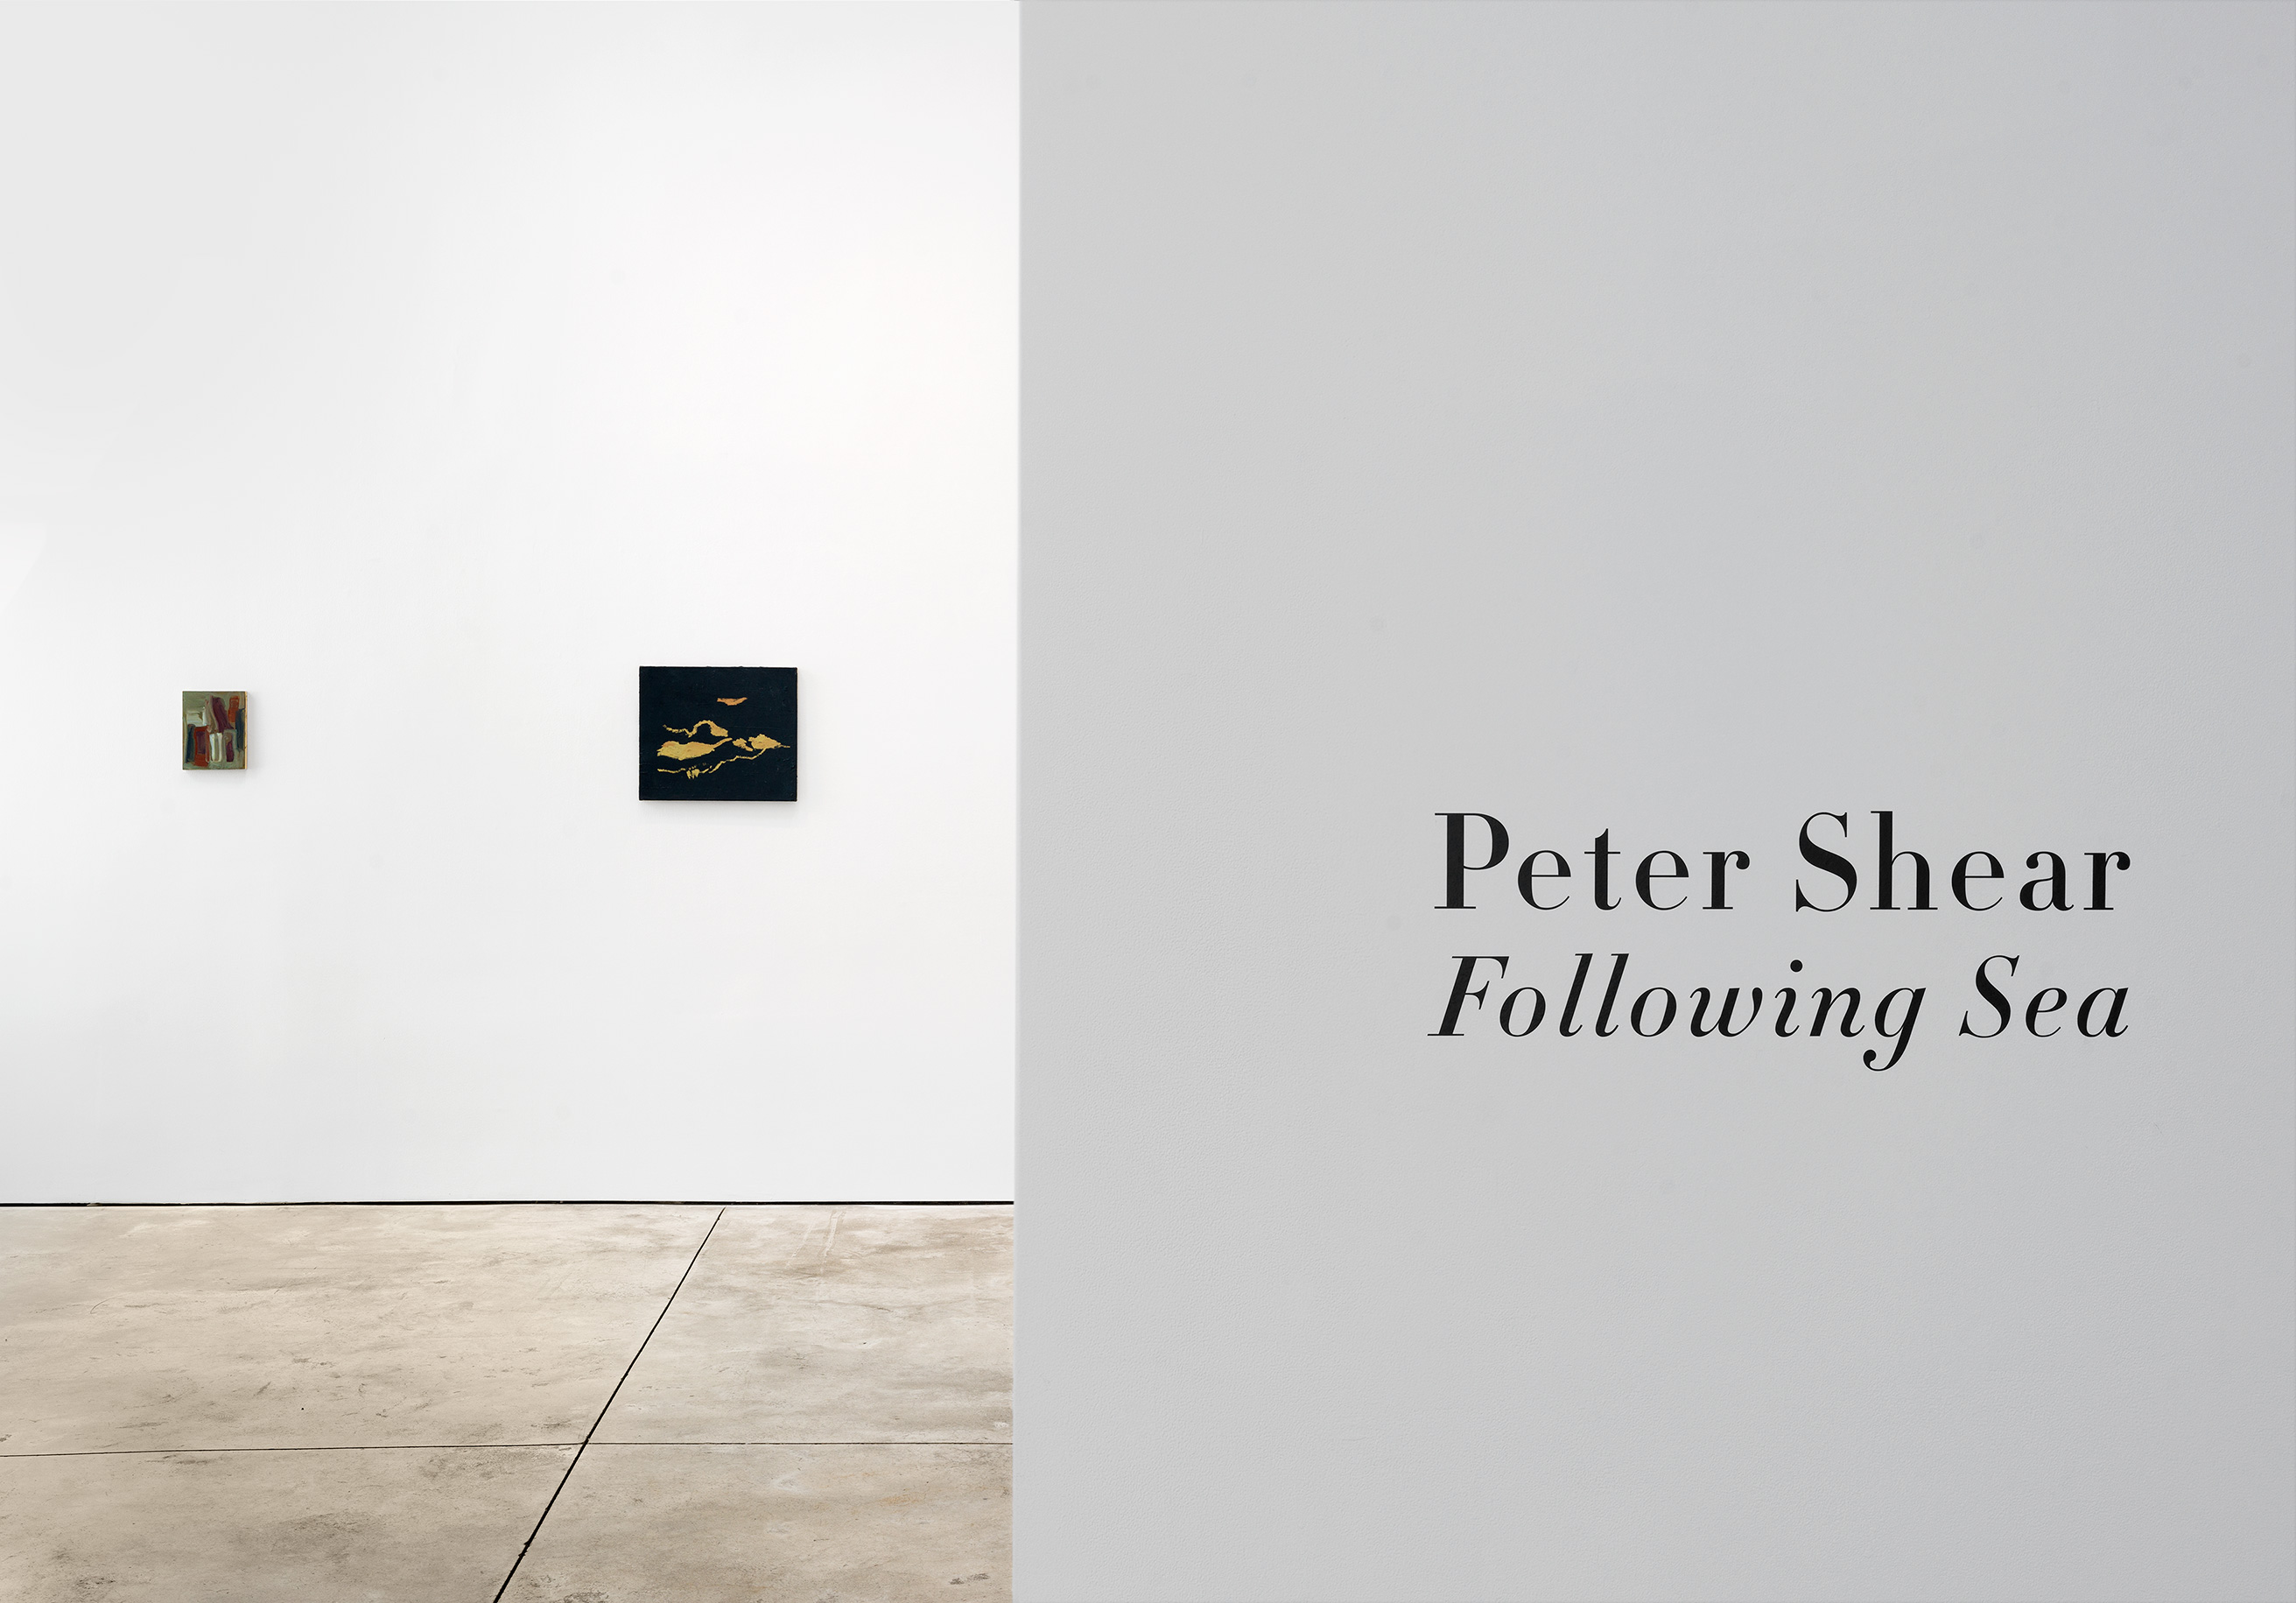 Installation image for Peter Shear: Following Sea, at Cheim & Read